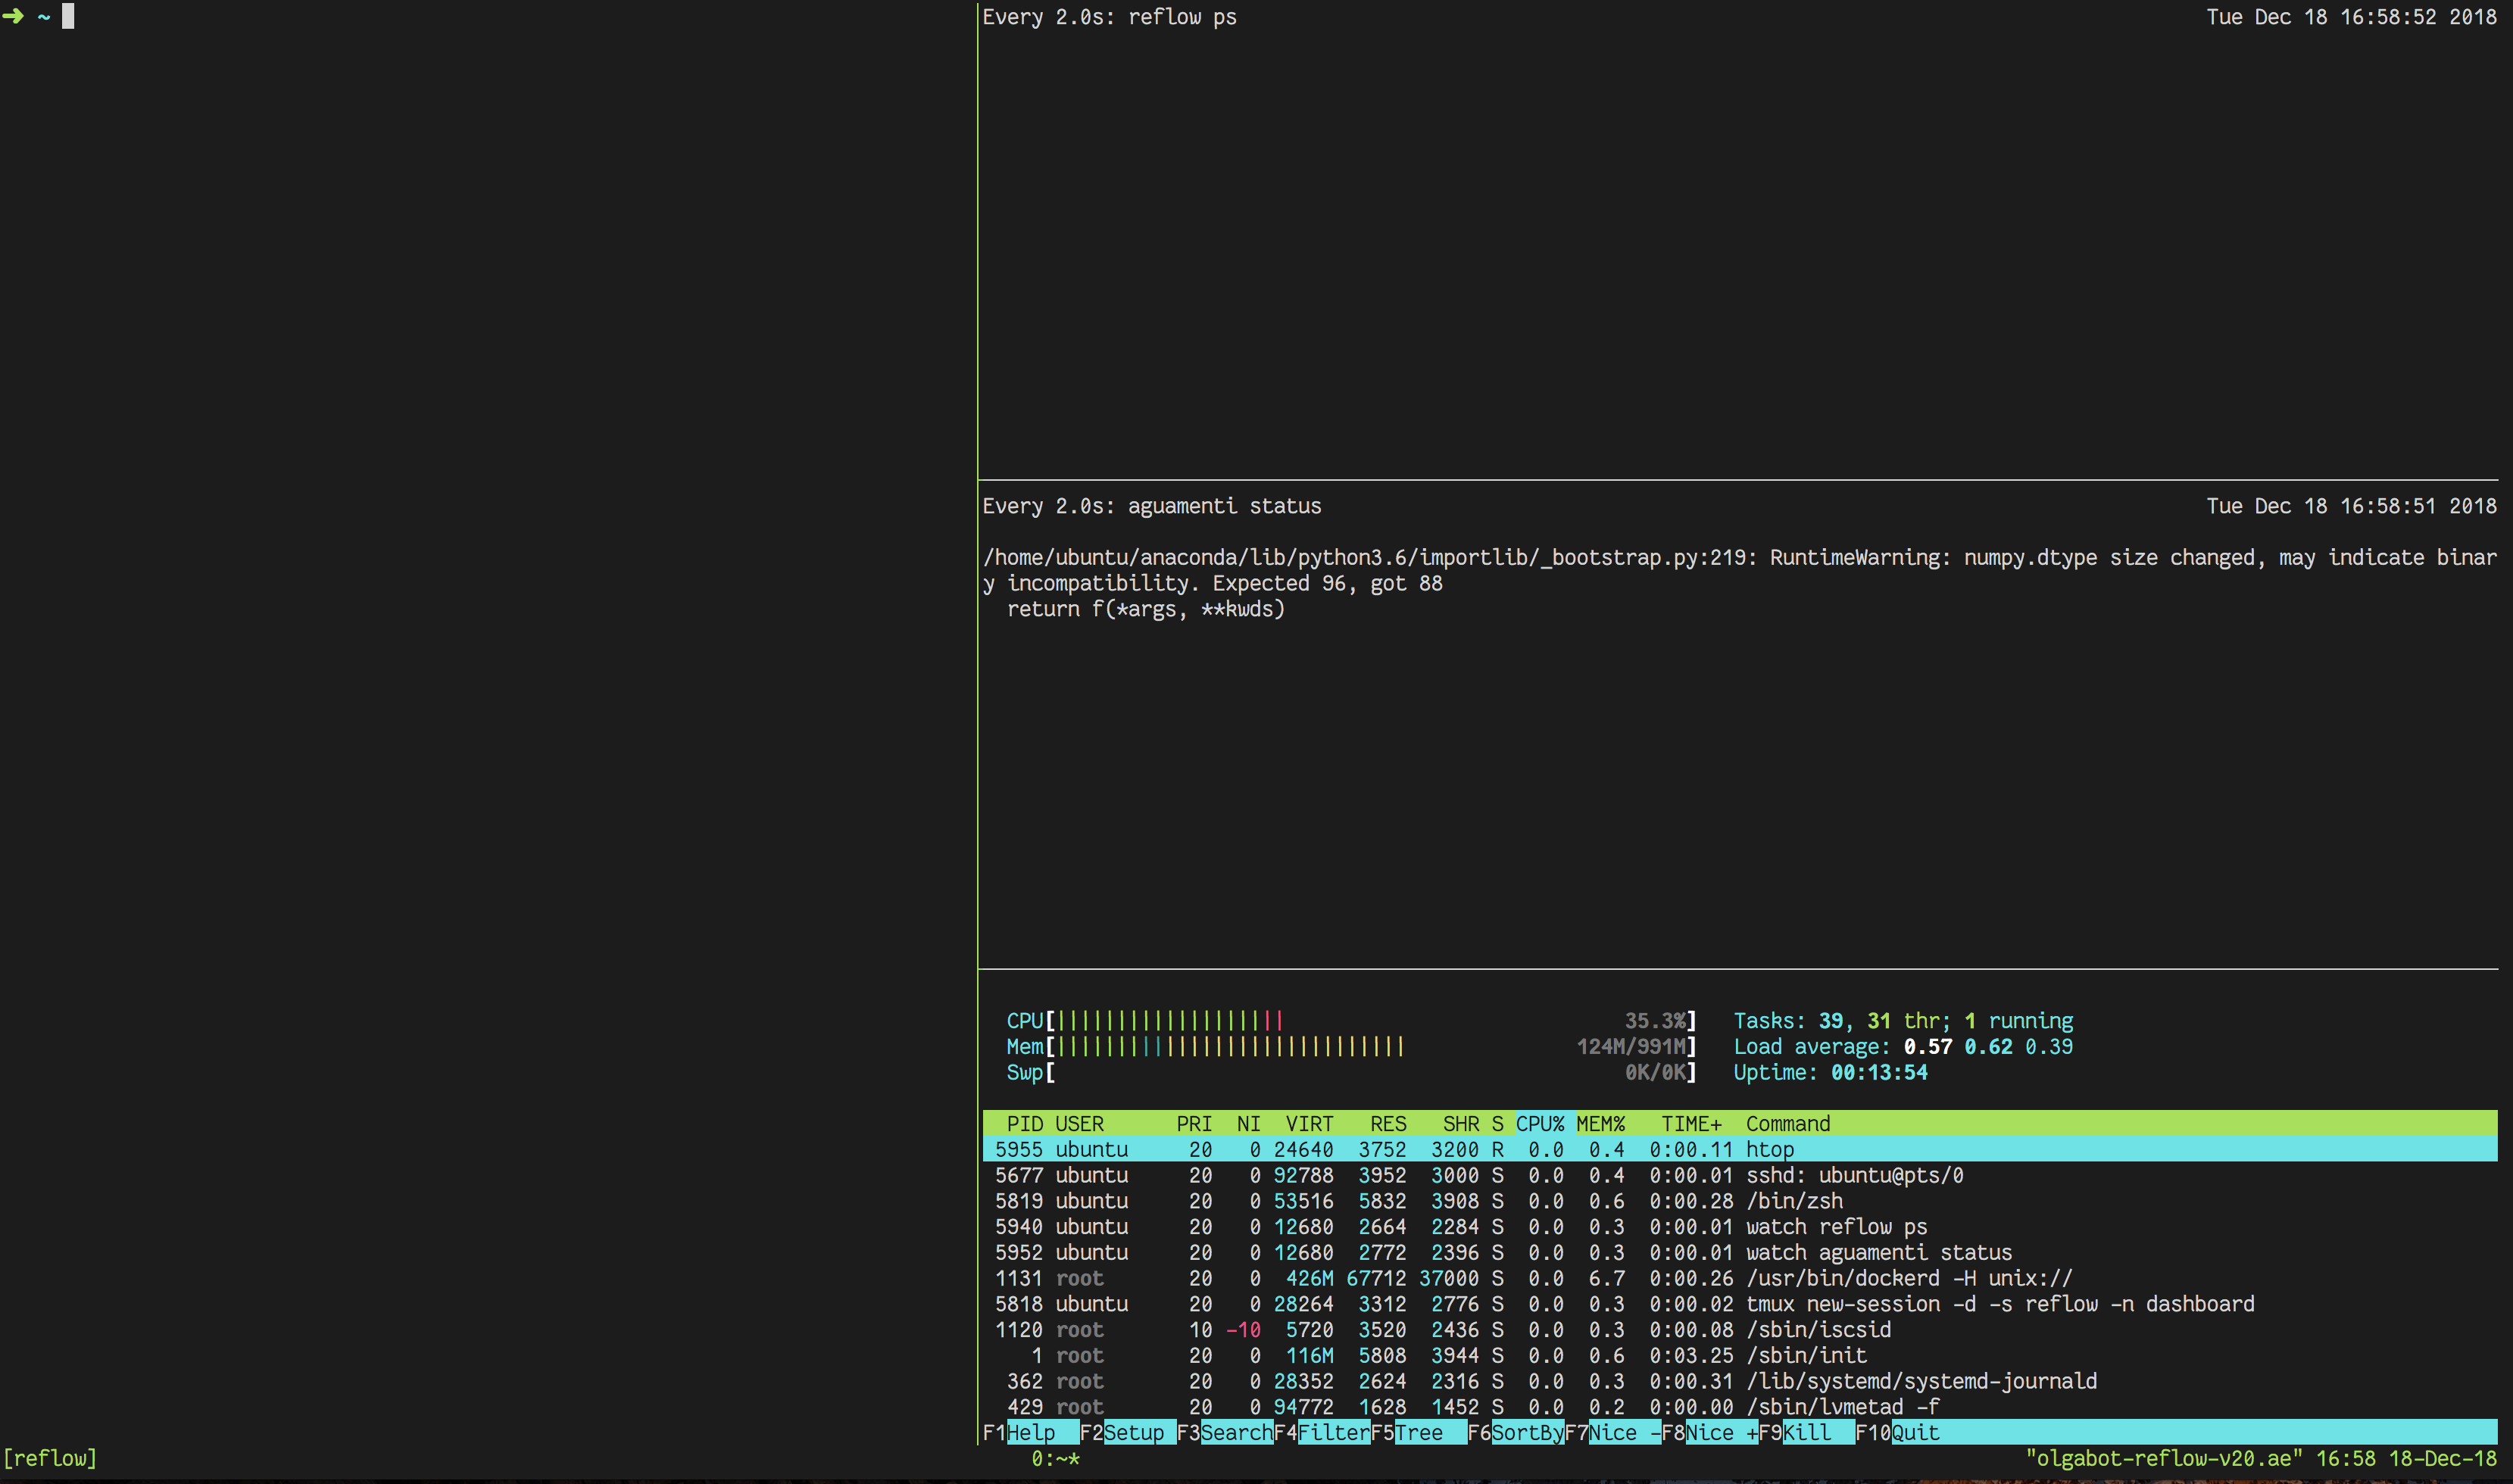 Tmux session with 